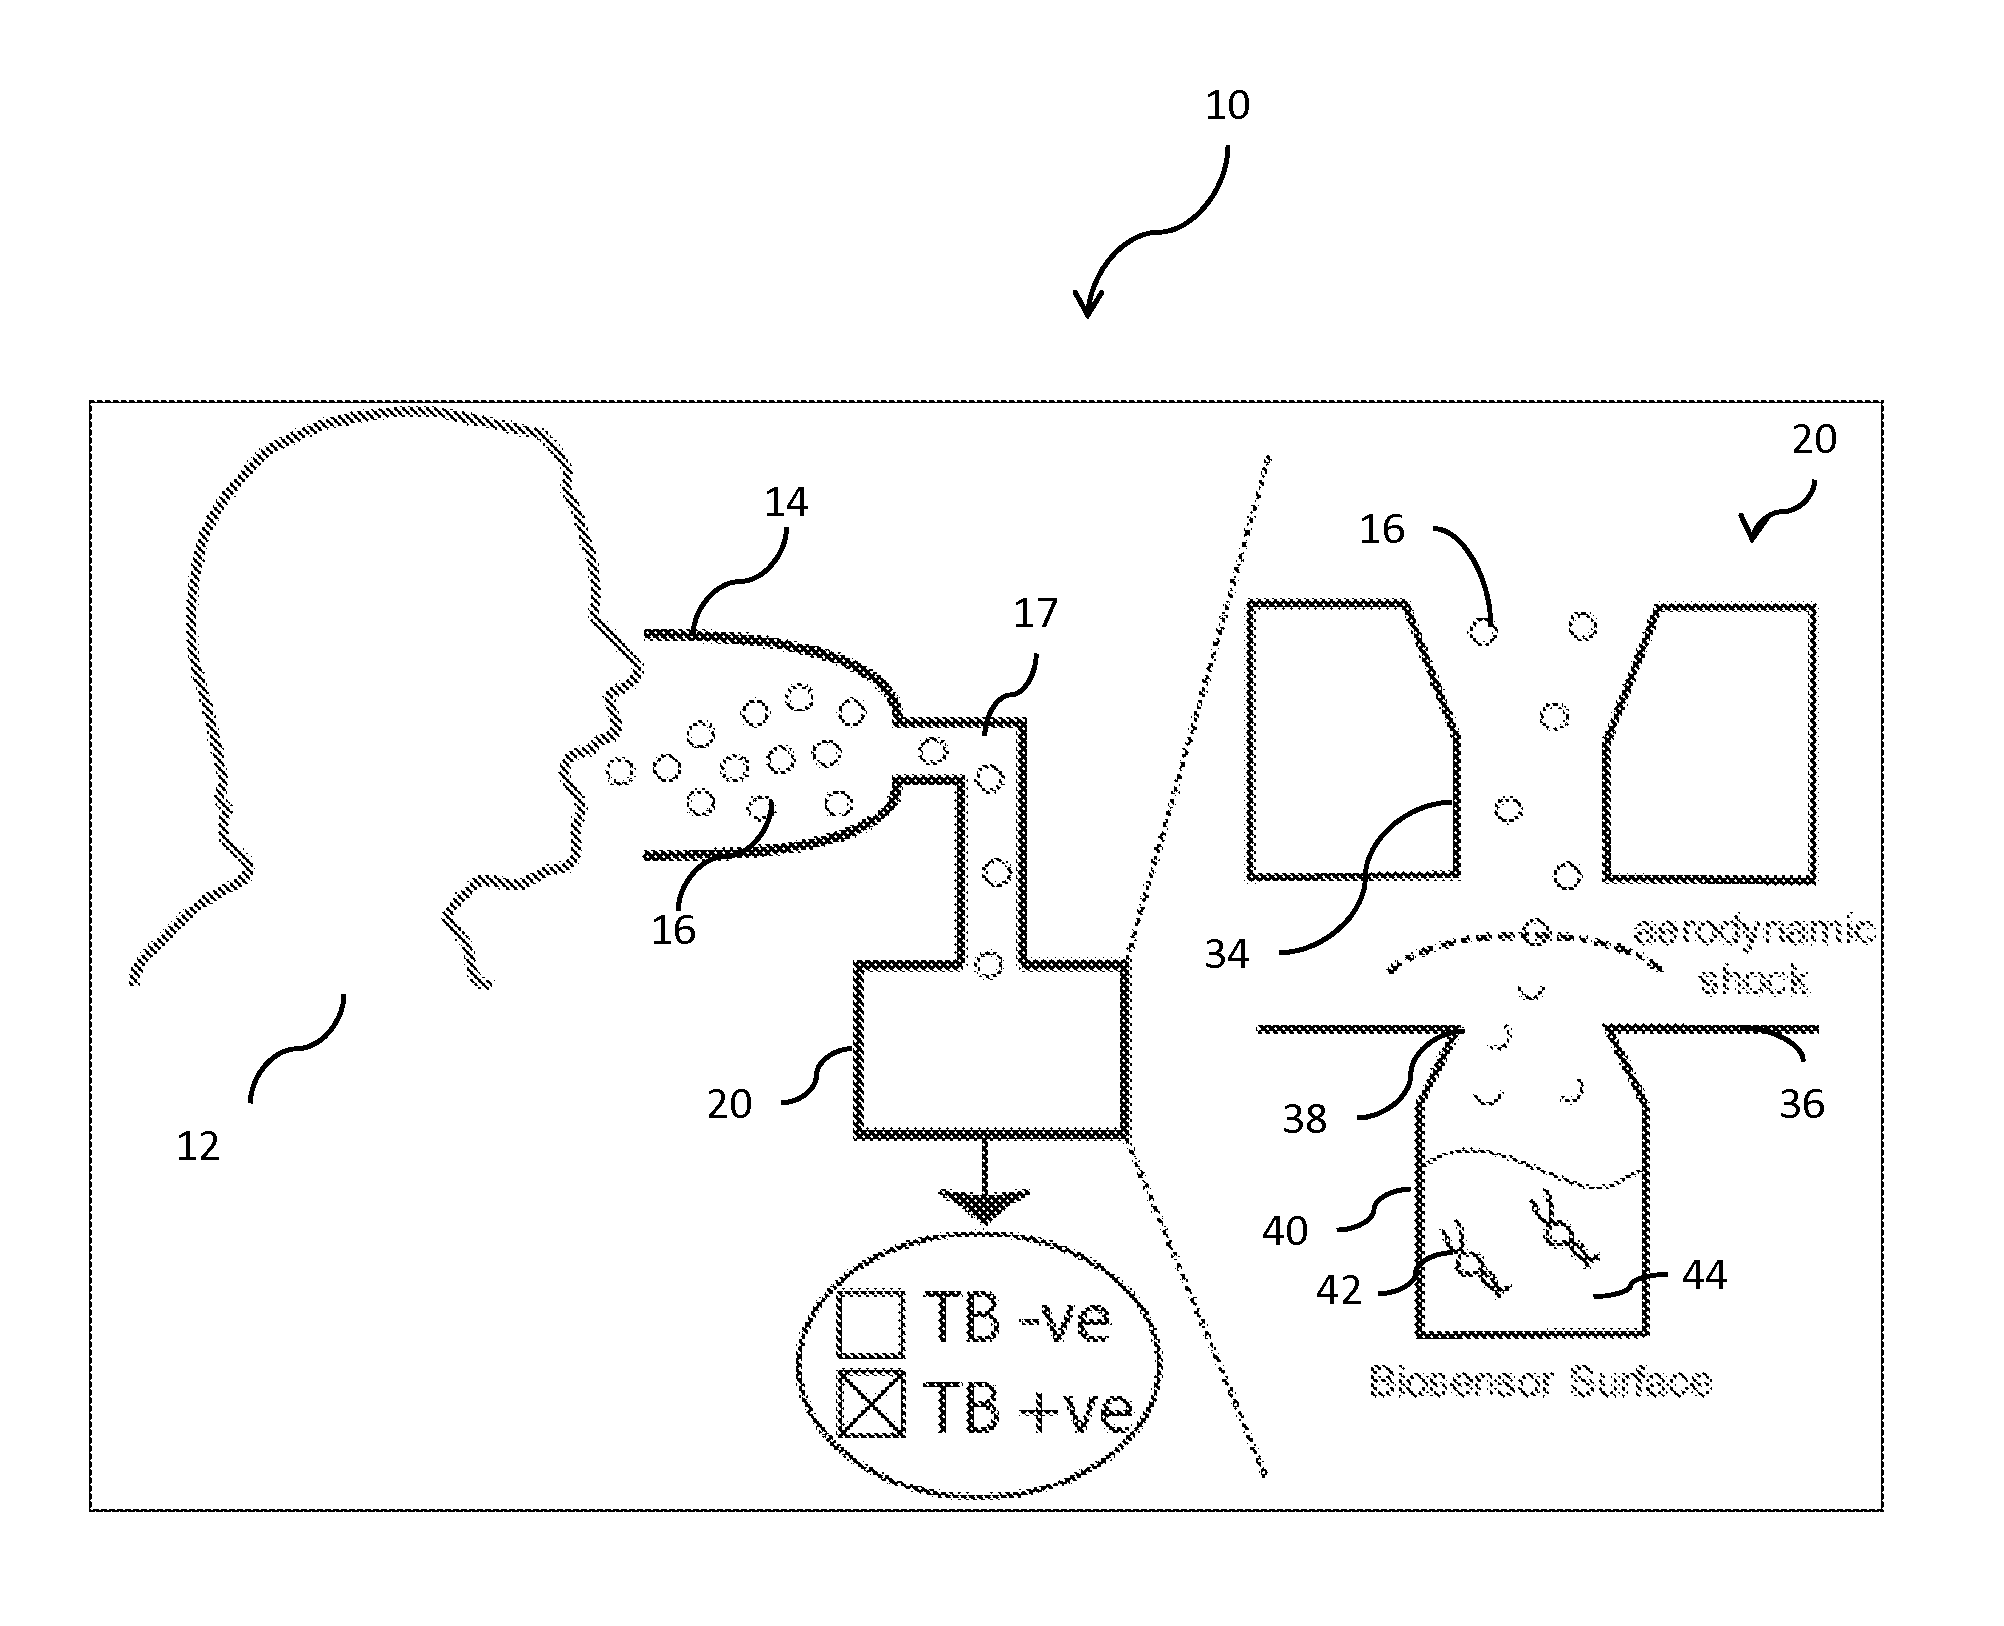 System for airborne bacterial sample collection and analysis